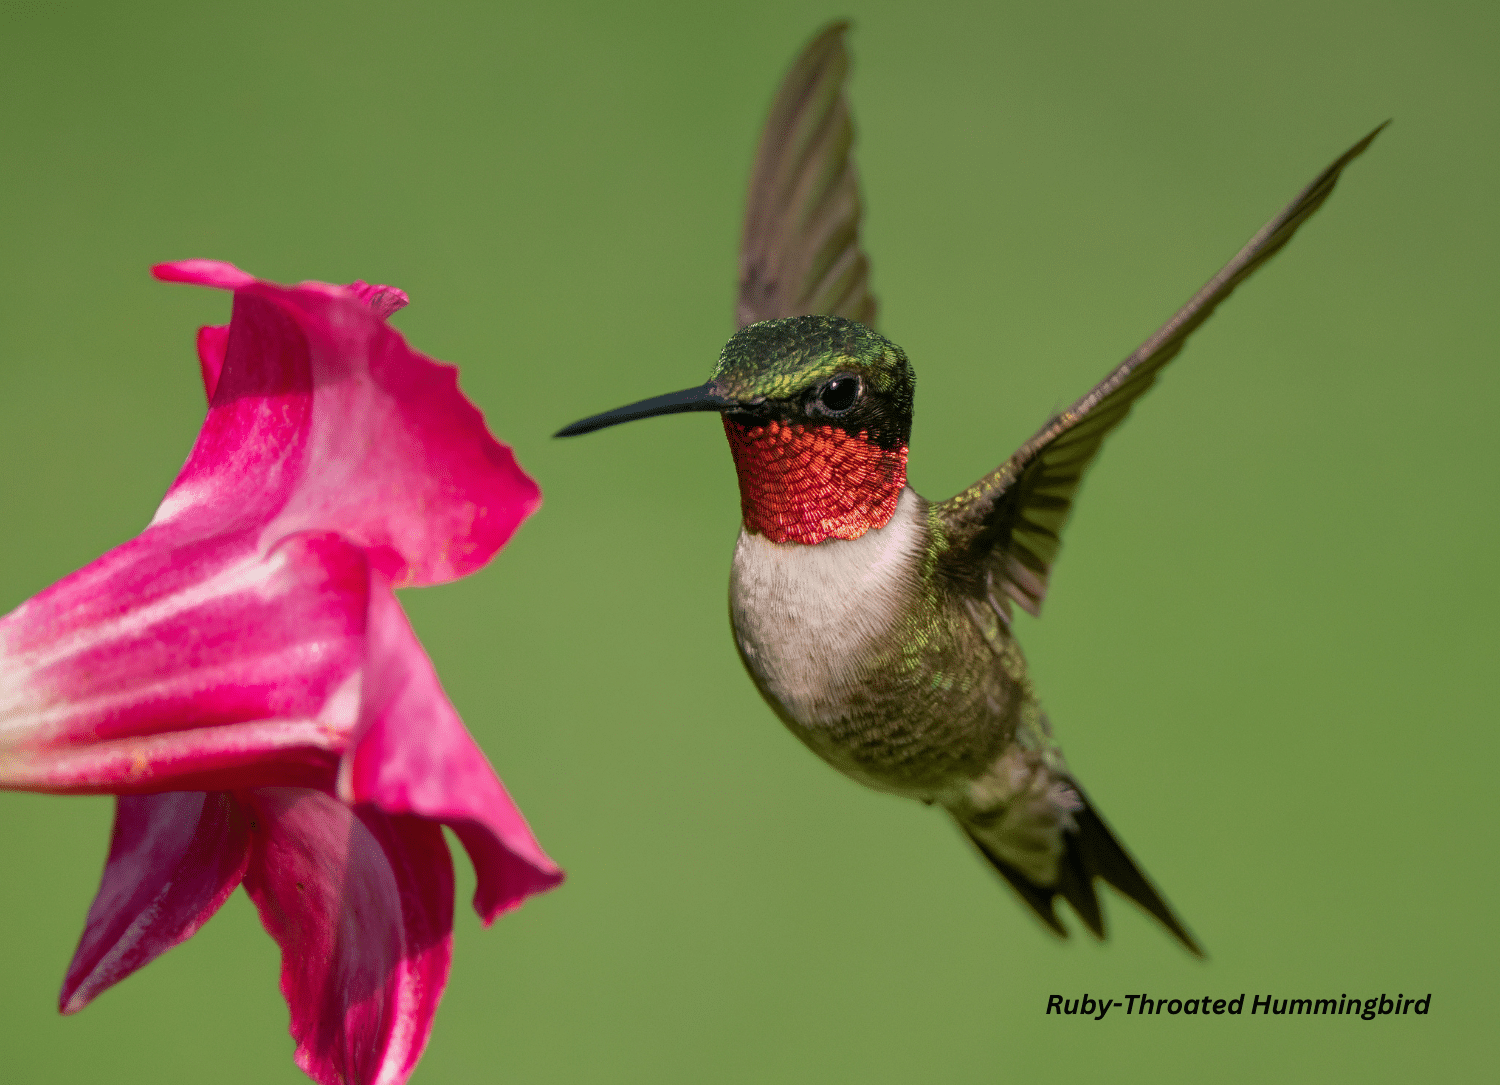 Horizontal photo of a Ruby-Throated Hummingbird hovering by a pink flower